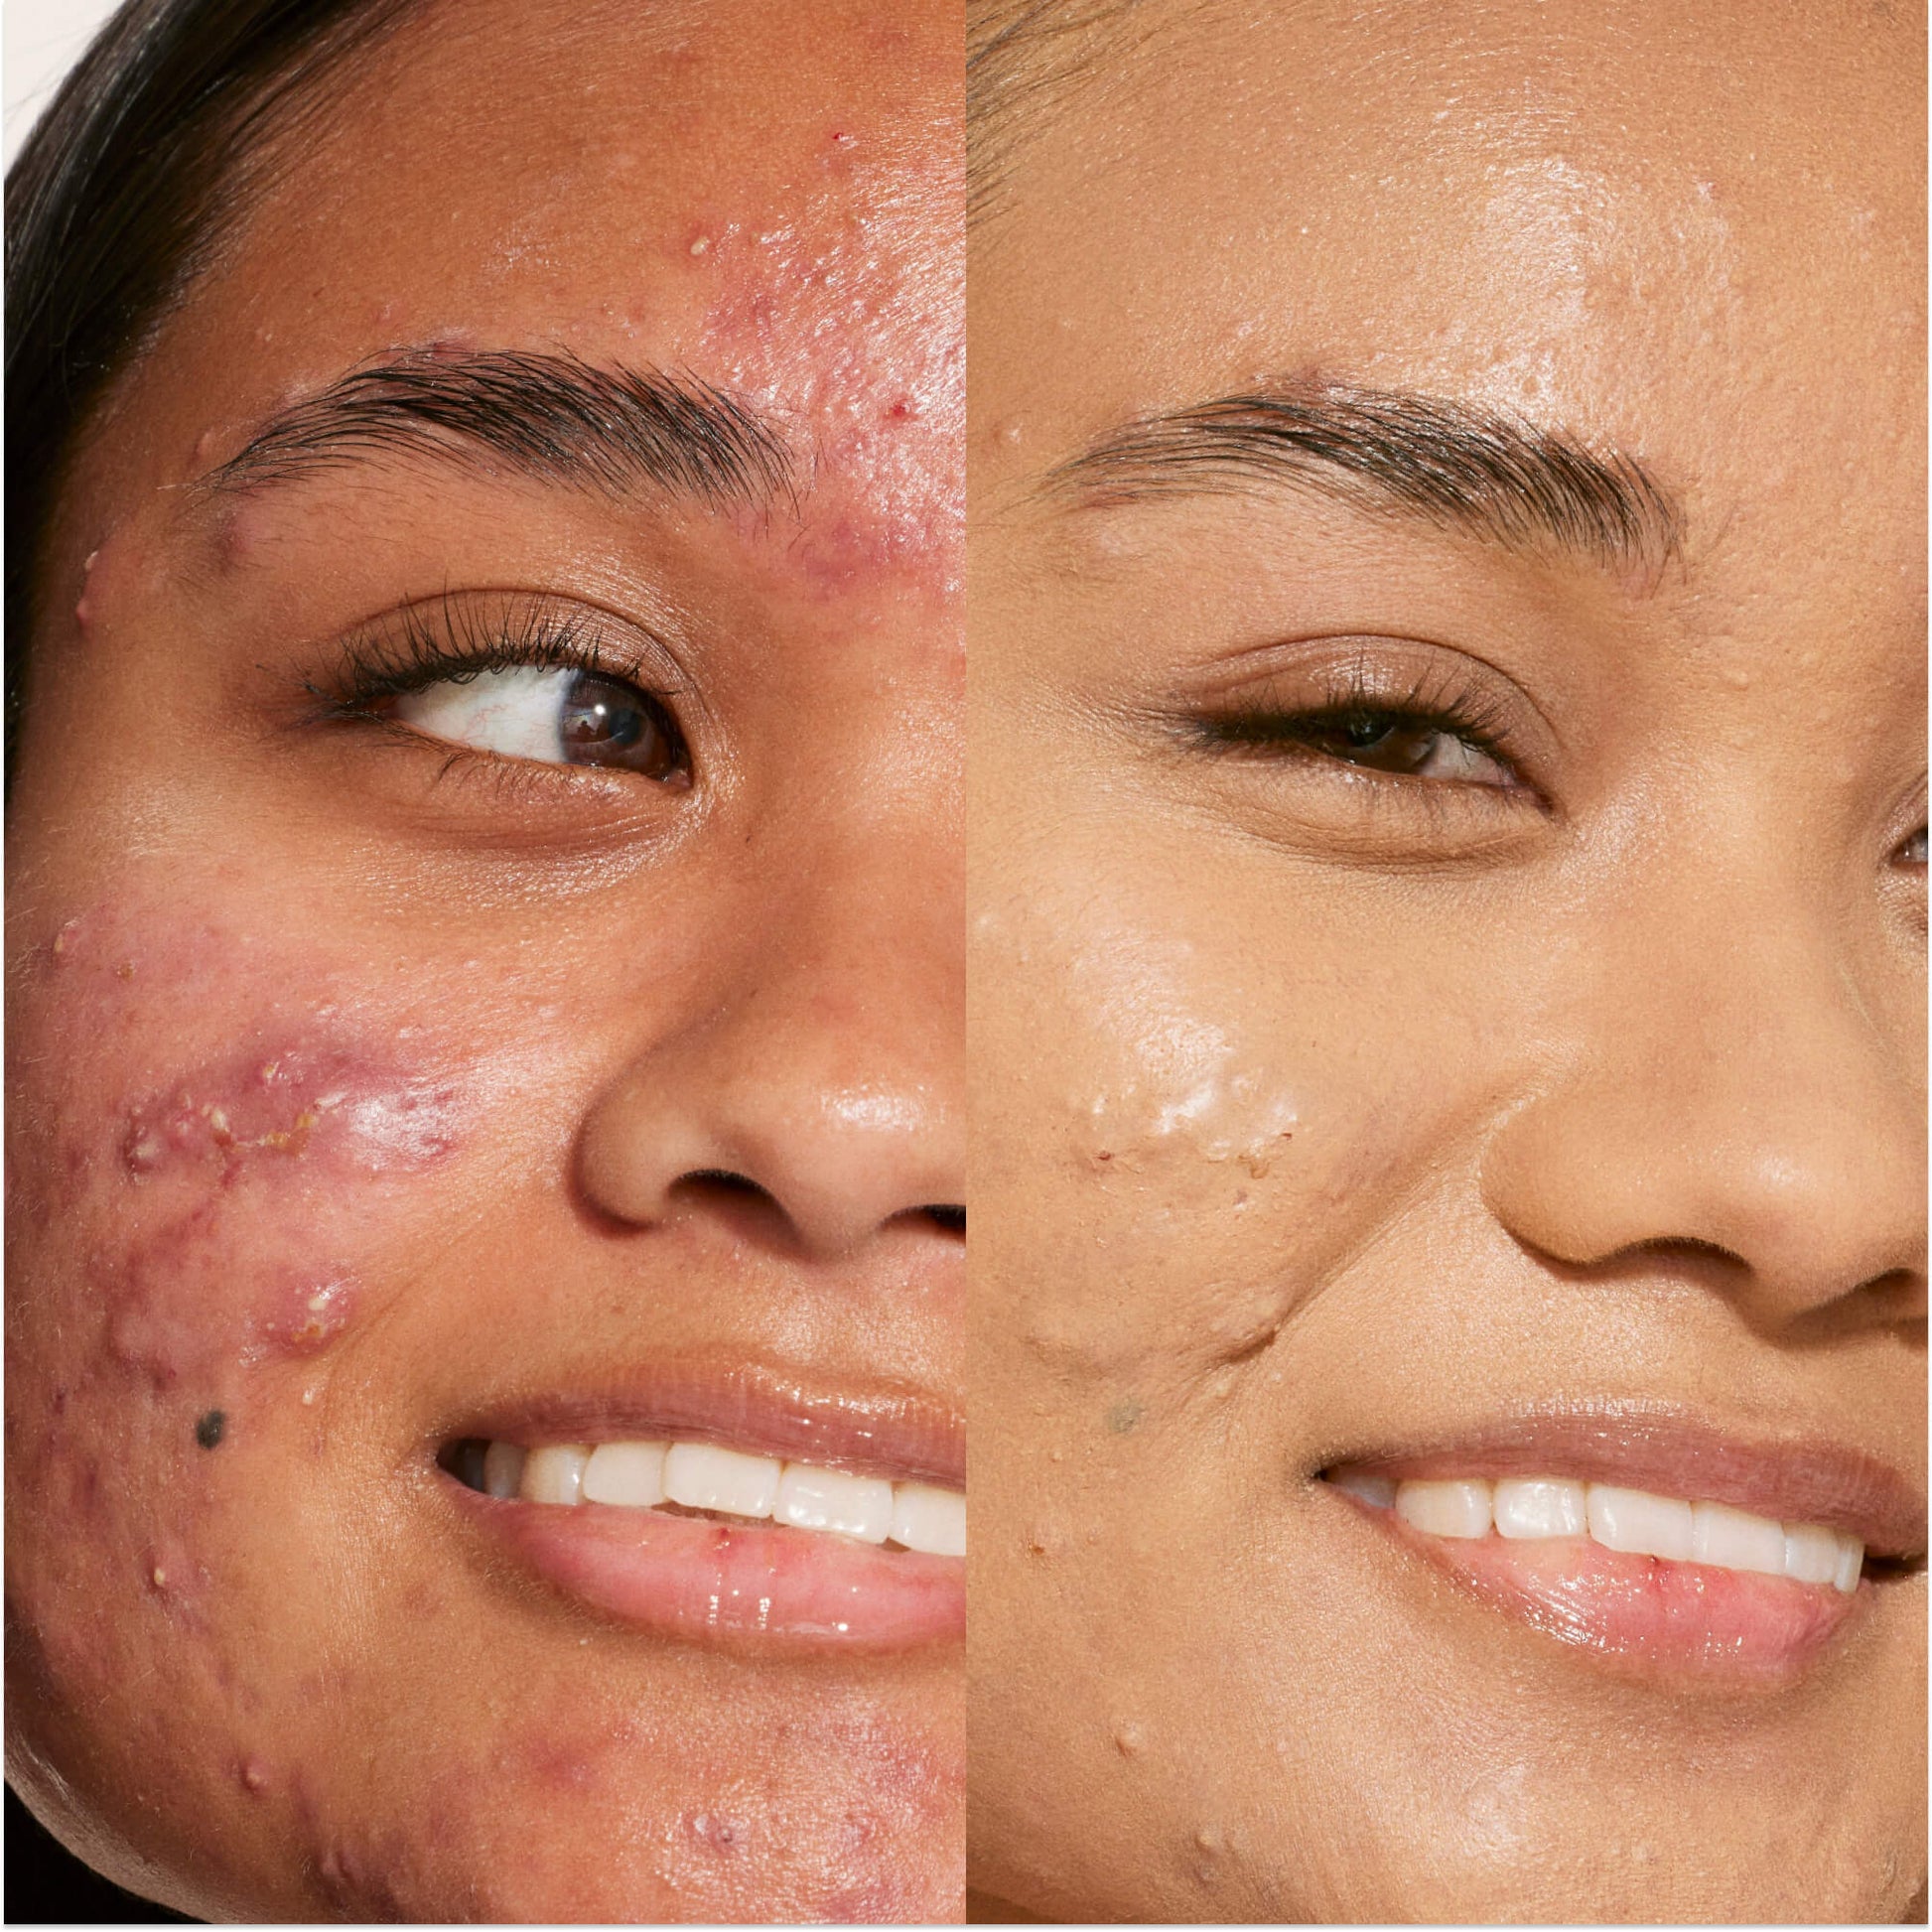 A person's face before and after using Tower 28 Beauty's Swipe Serum Concealer in shade 11.0 OC to cover up dark circles, blemishes, and discoloration